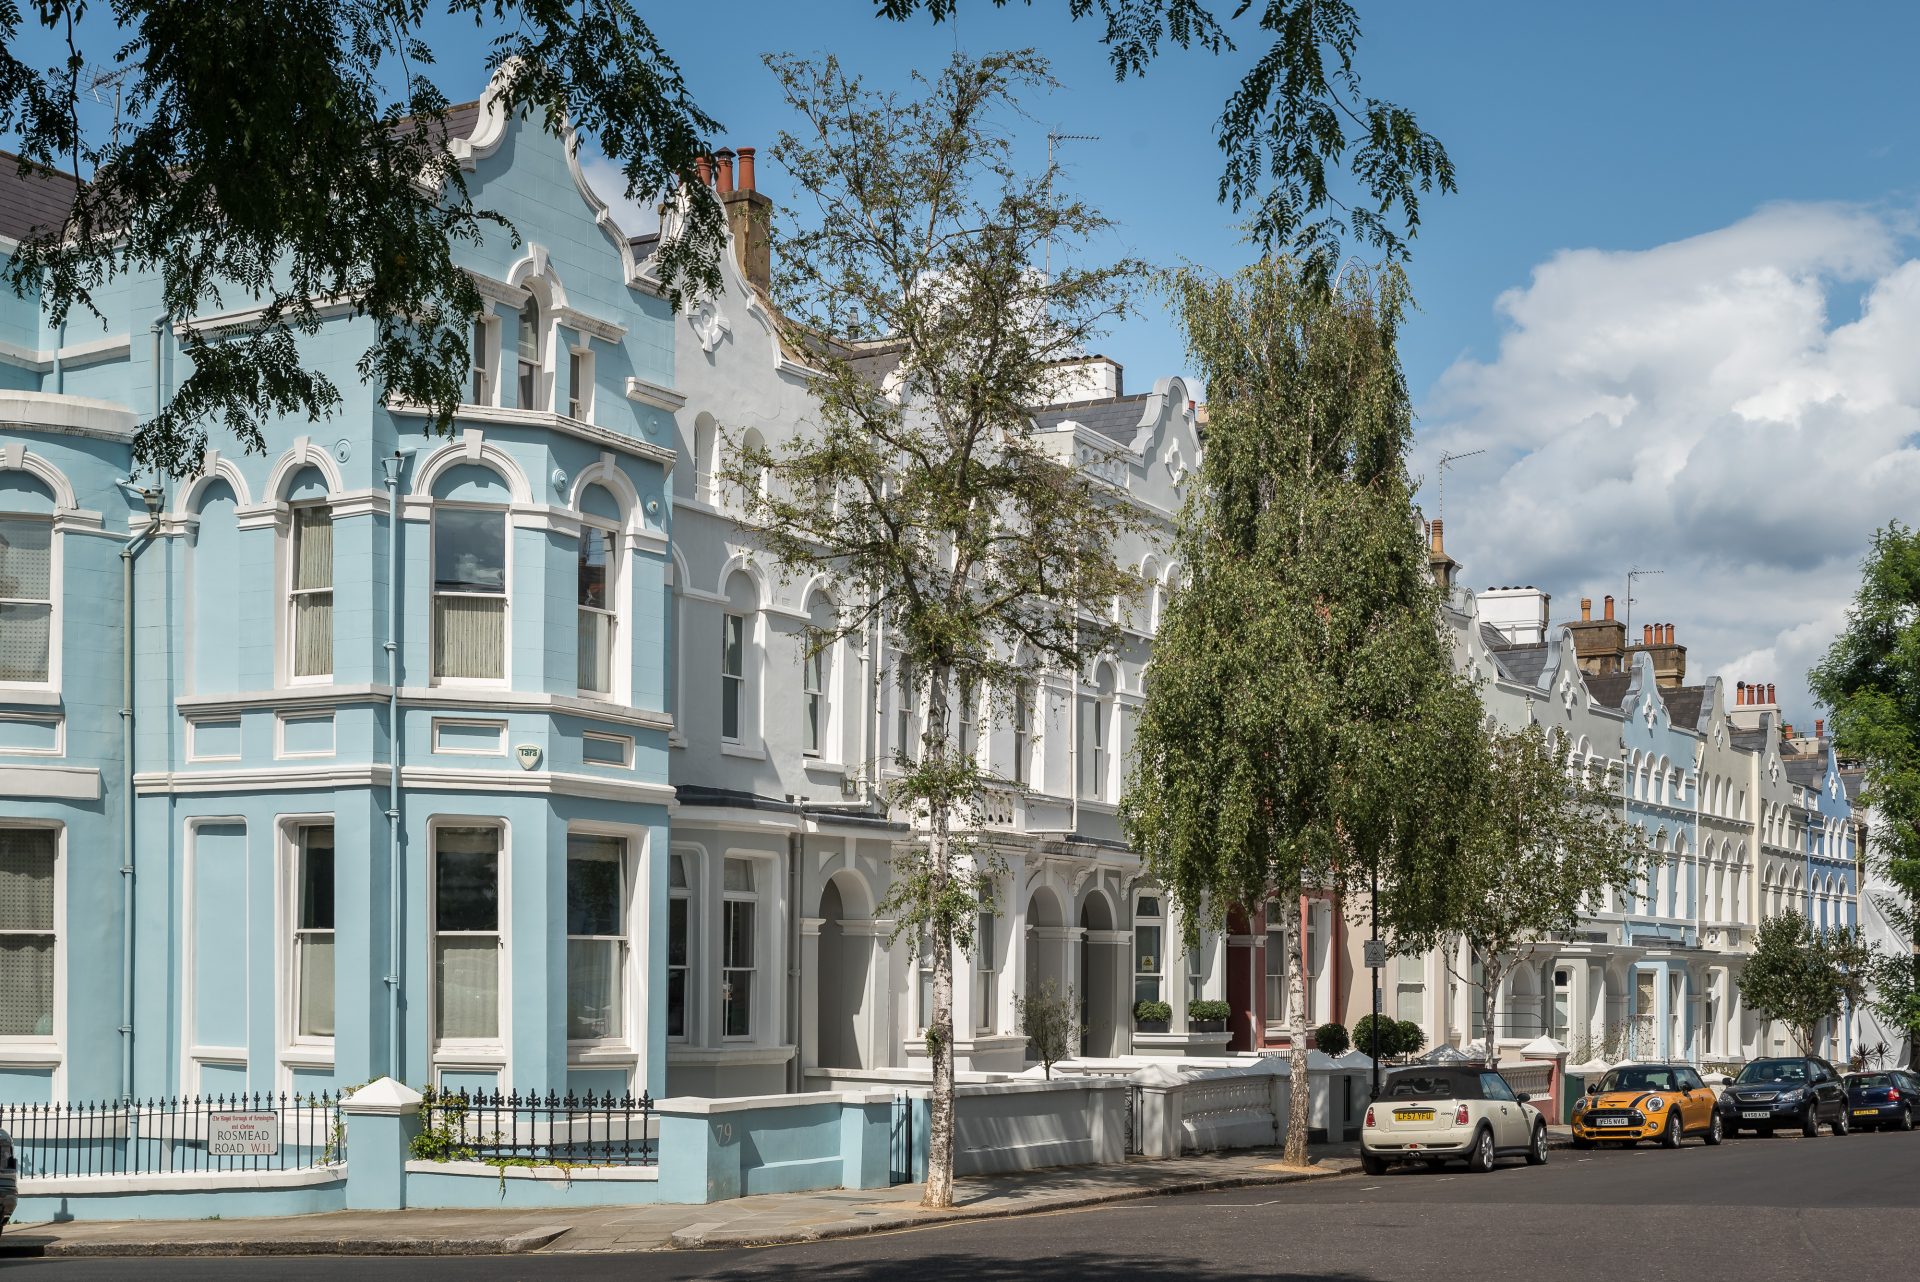 Bayswater & Maida Vale lettings services